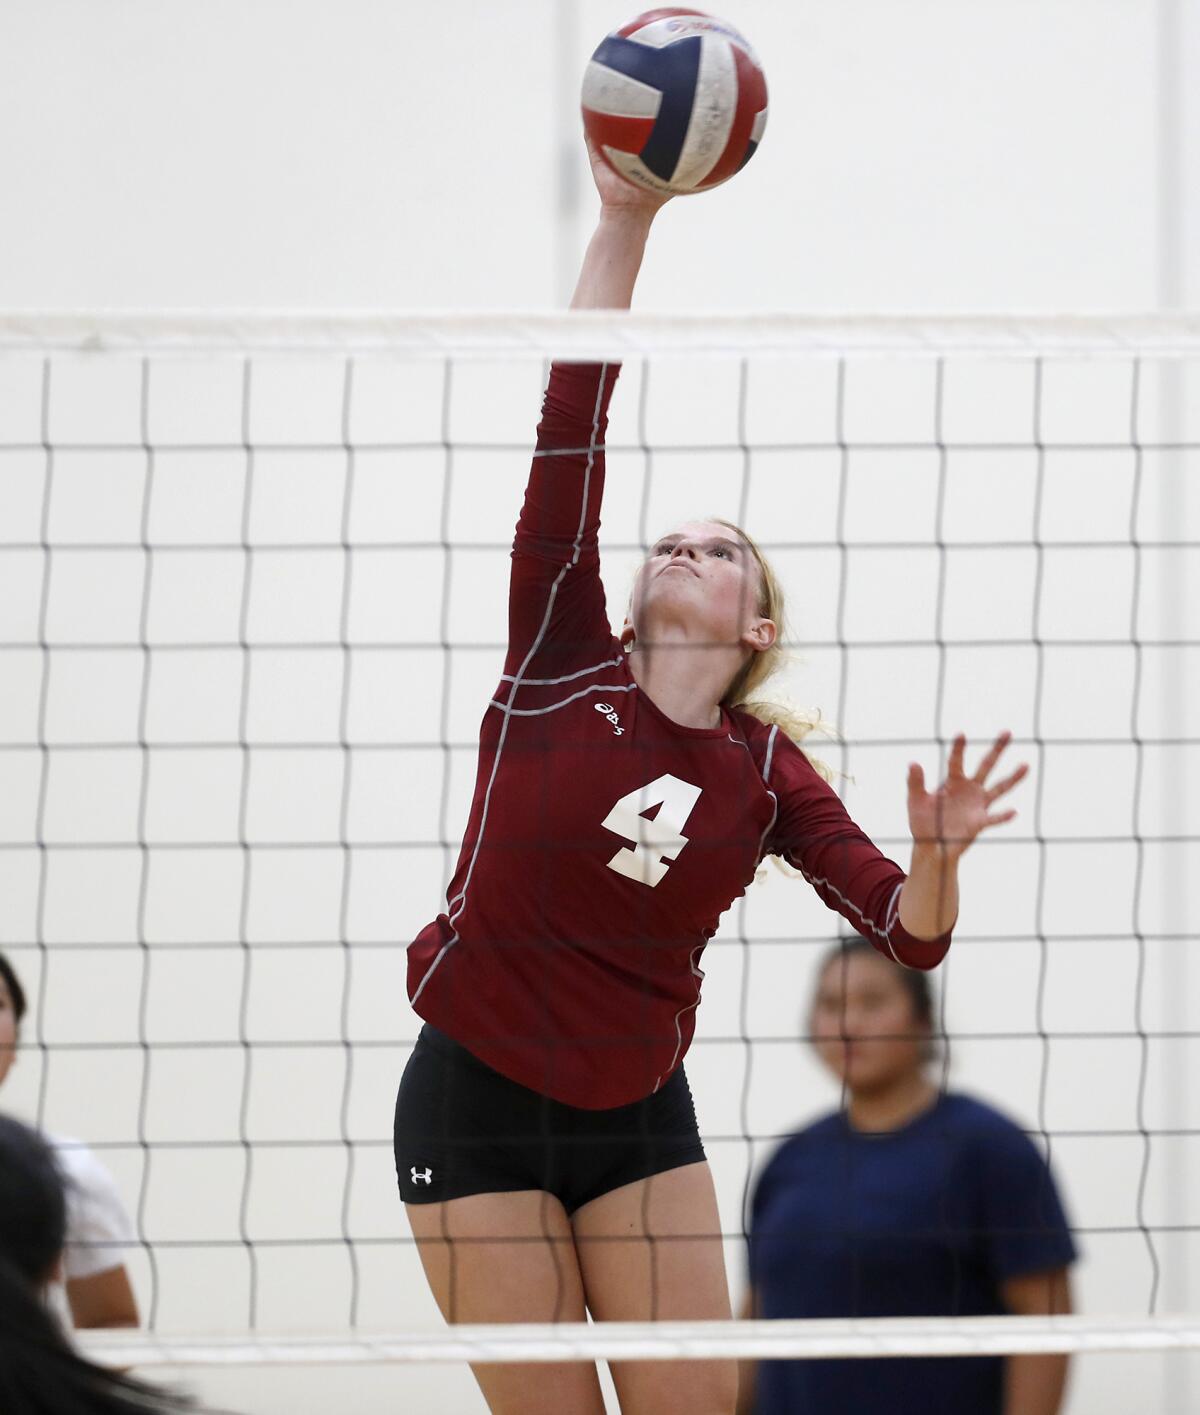 Estancia's Ruby Uchytil (4) spikes the ball in the first set against Bolsa Grande on Tuesday in a nonleague match.